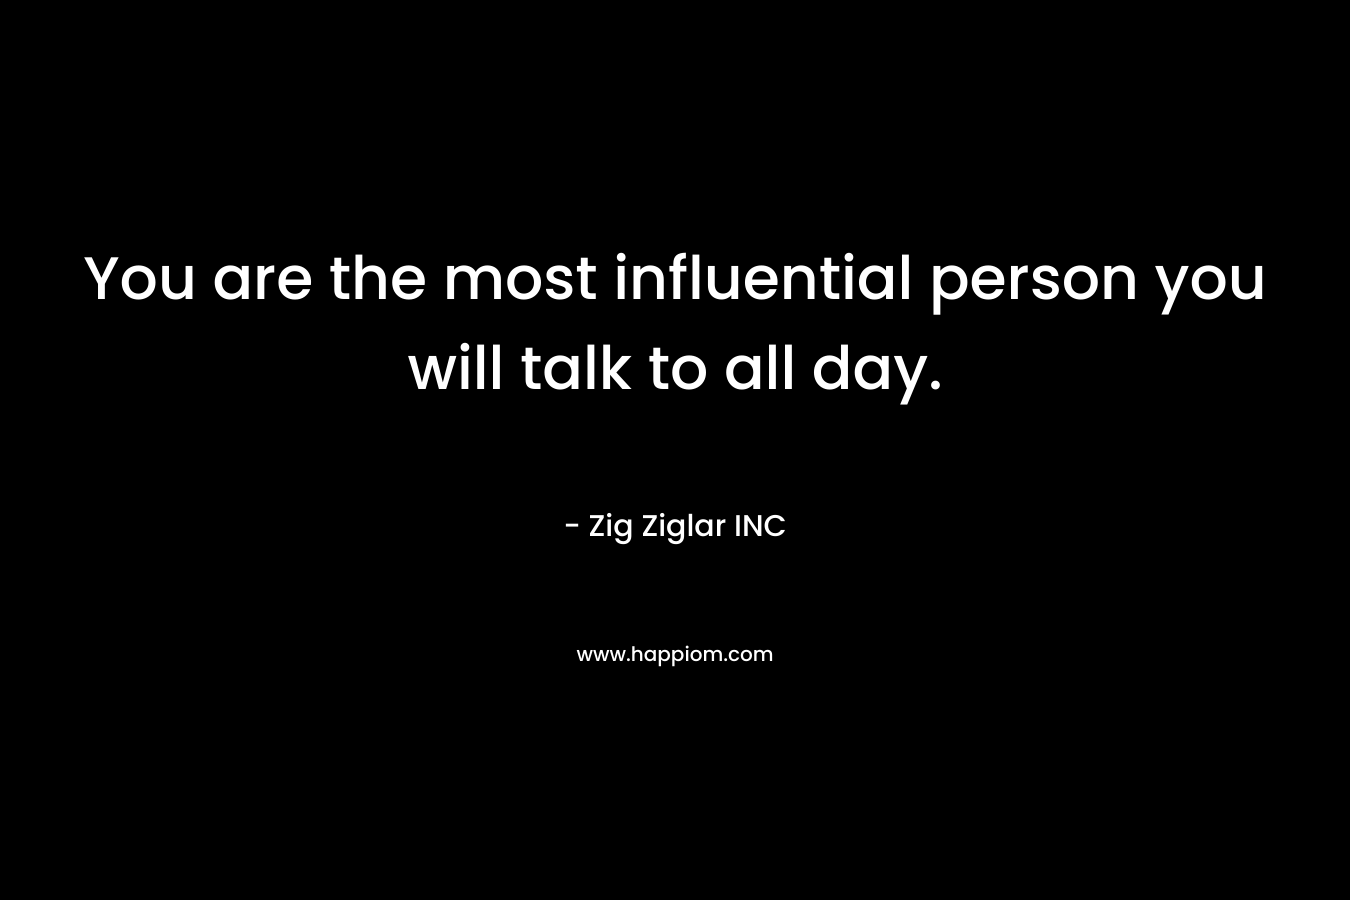 You are the most influential person you will talk to all day. – Zig Ziglar INC